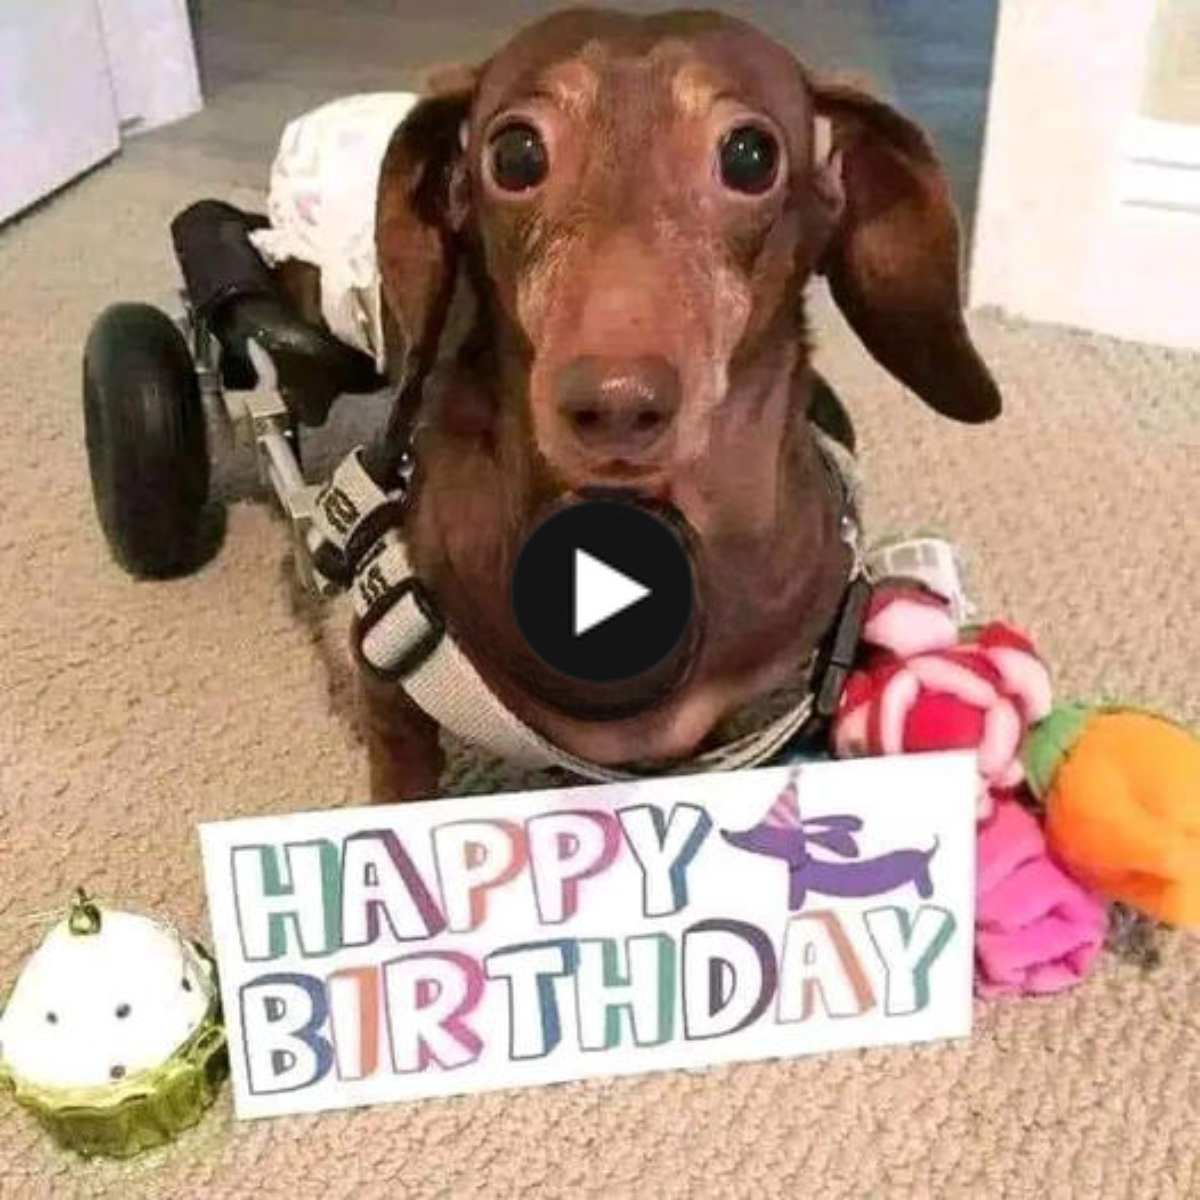 The small dog’s happiness was beyond words, as his buddies remembered his birthday.